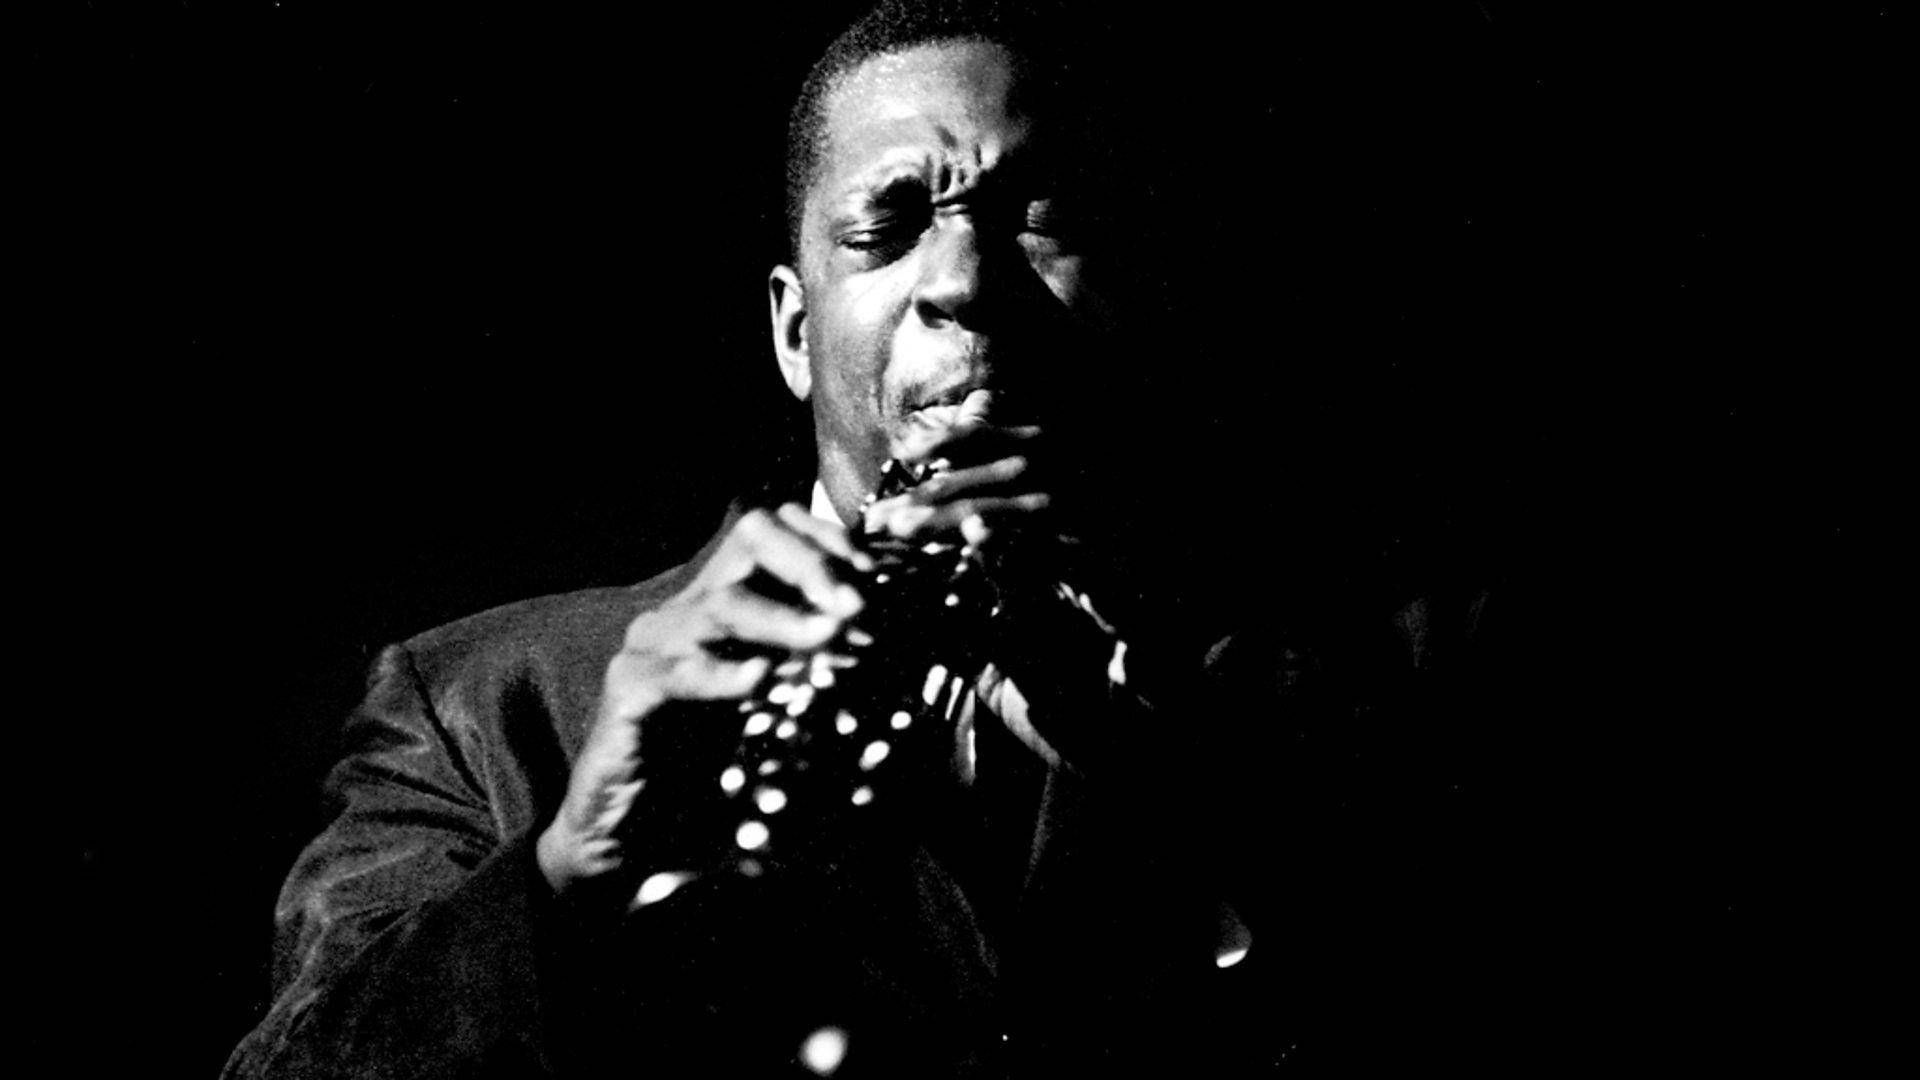 Legendary American Saxophonist John Coltrane playing at The Village Gate in 1961 Wallpaper